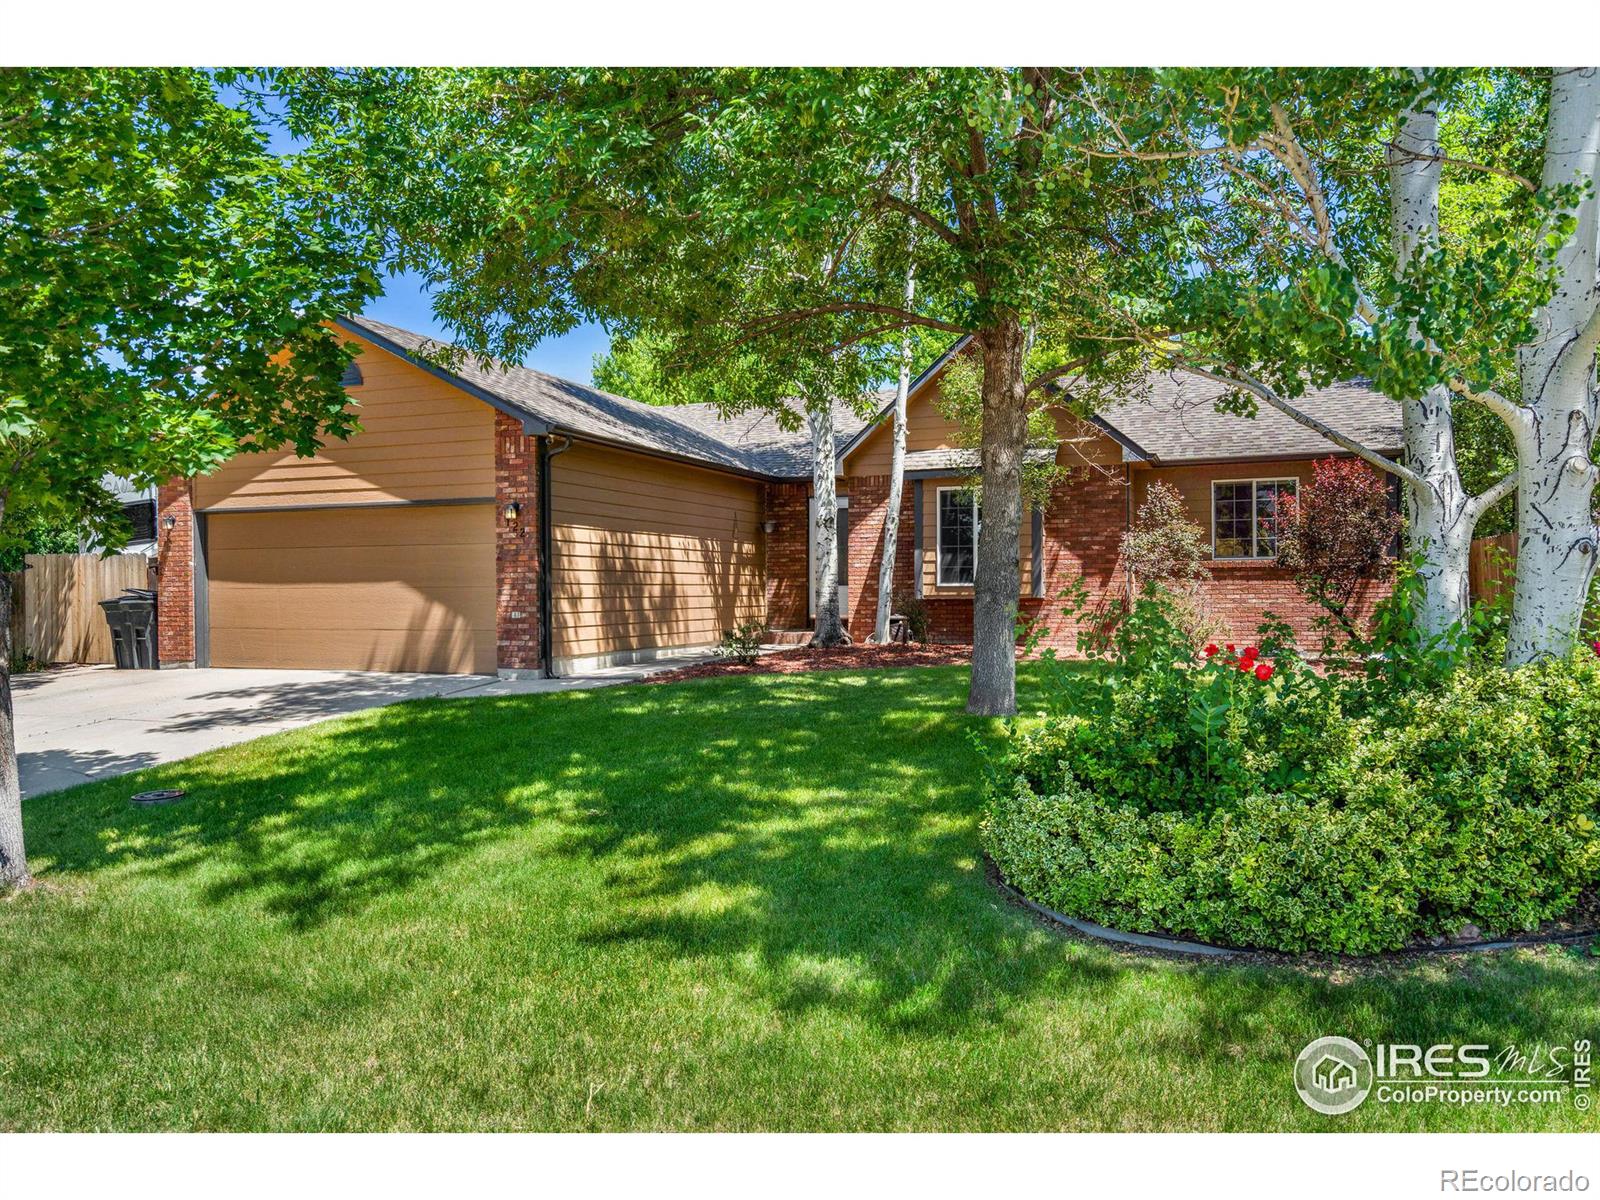 122 N 50th Ave Ct, greeley MLS: 123456789991448 Beds: 5 Baths: 2 Price: $440,000